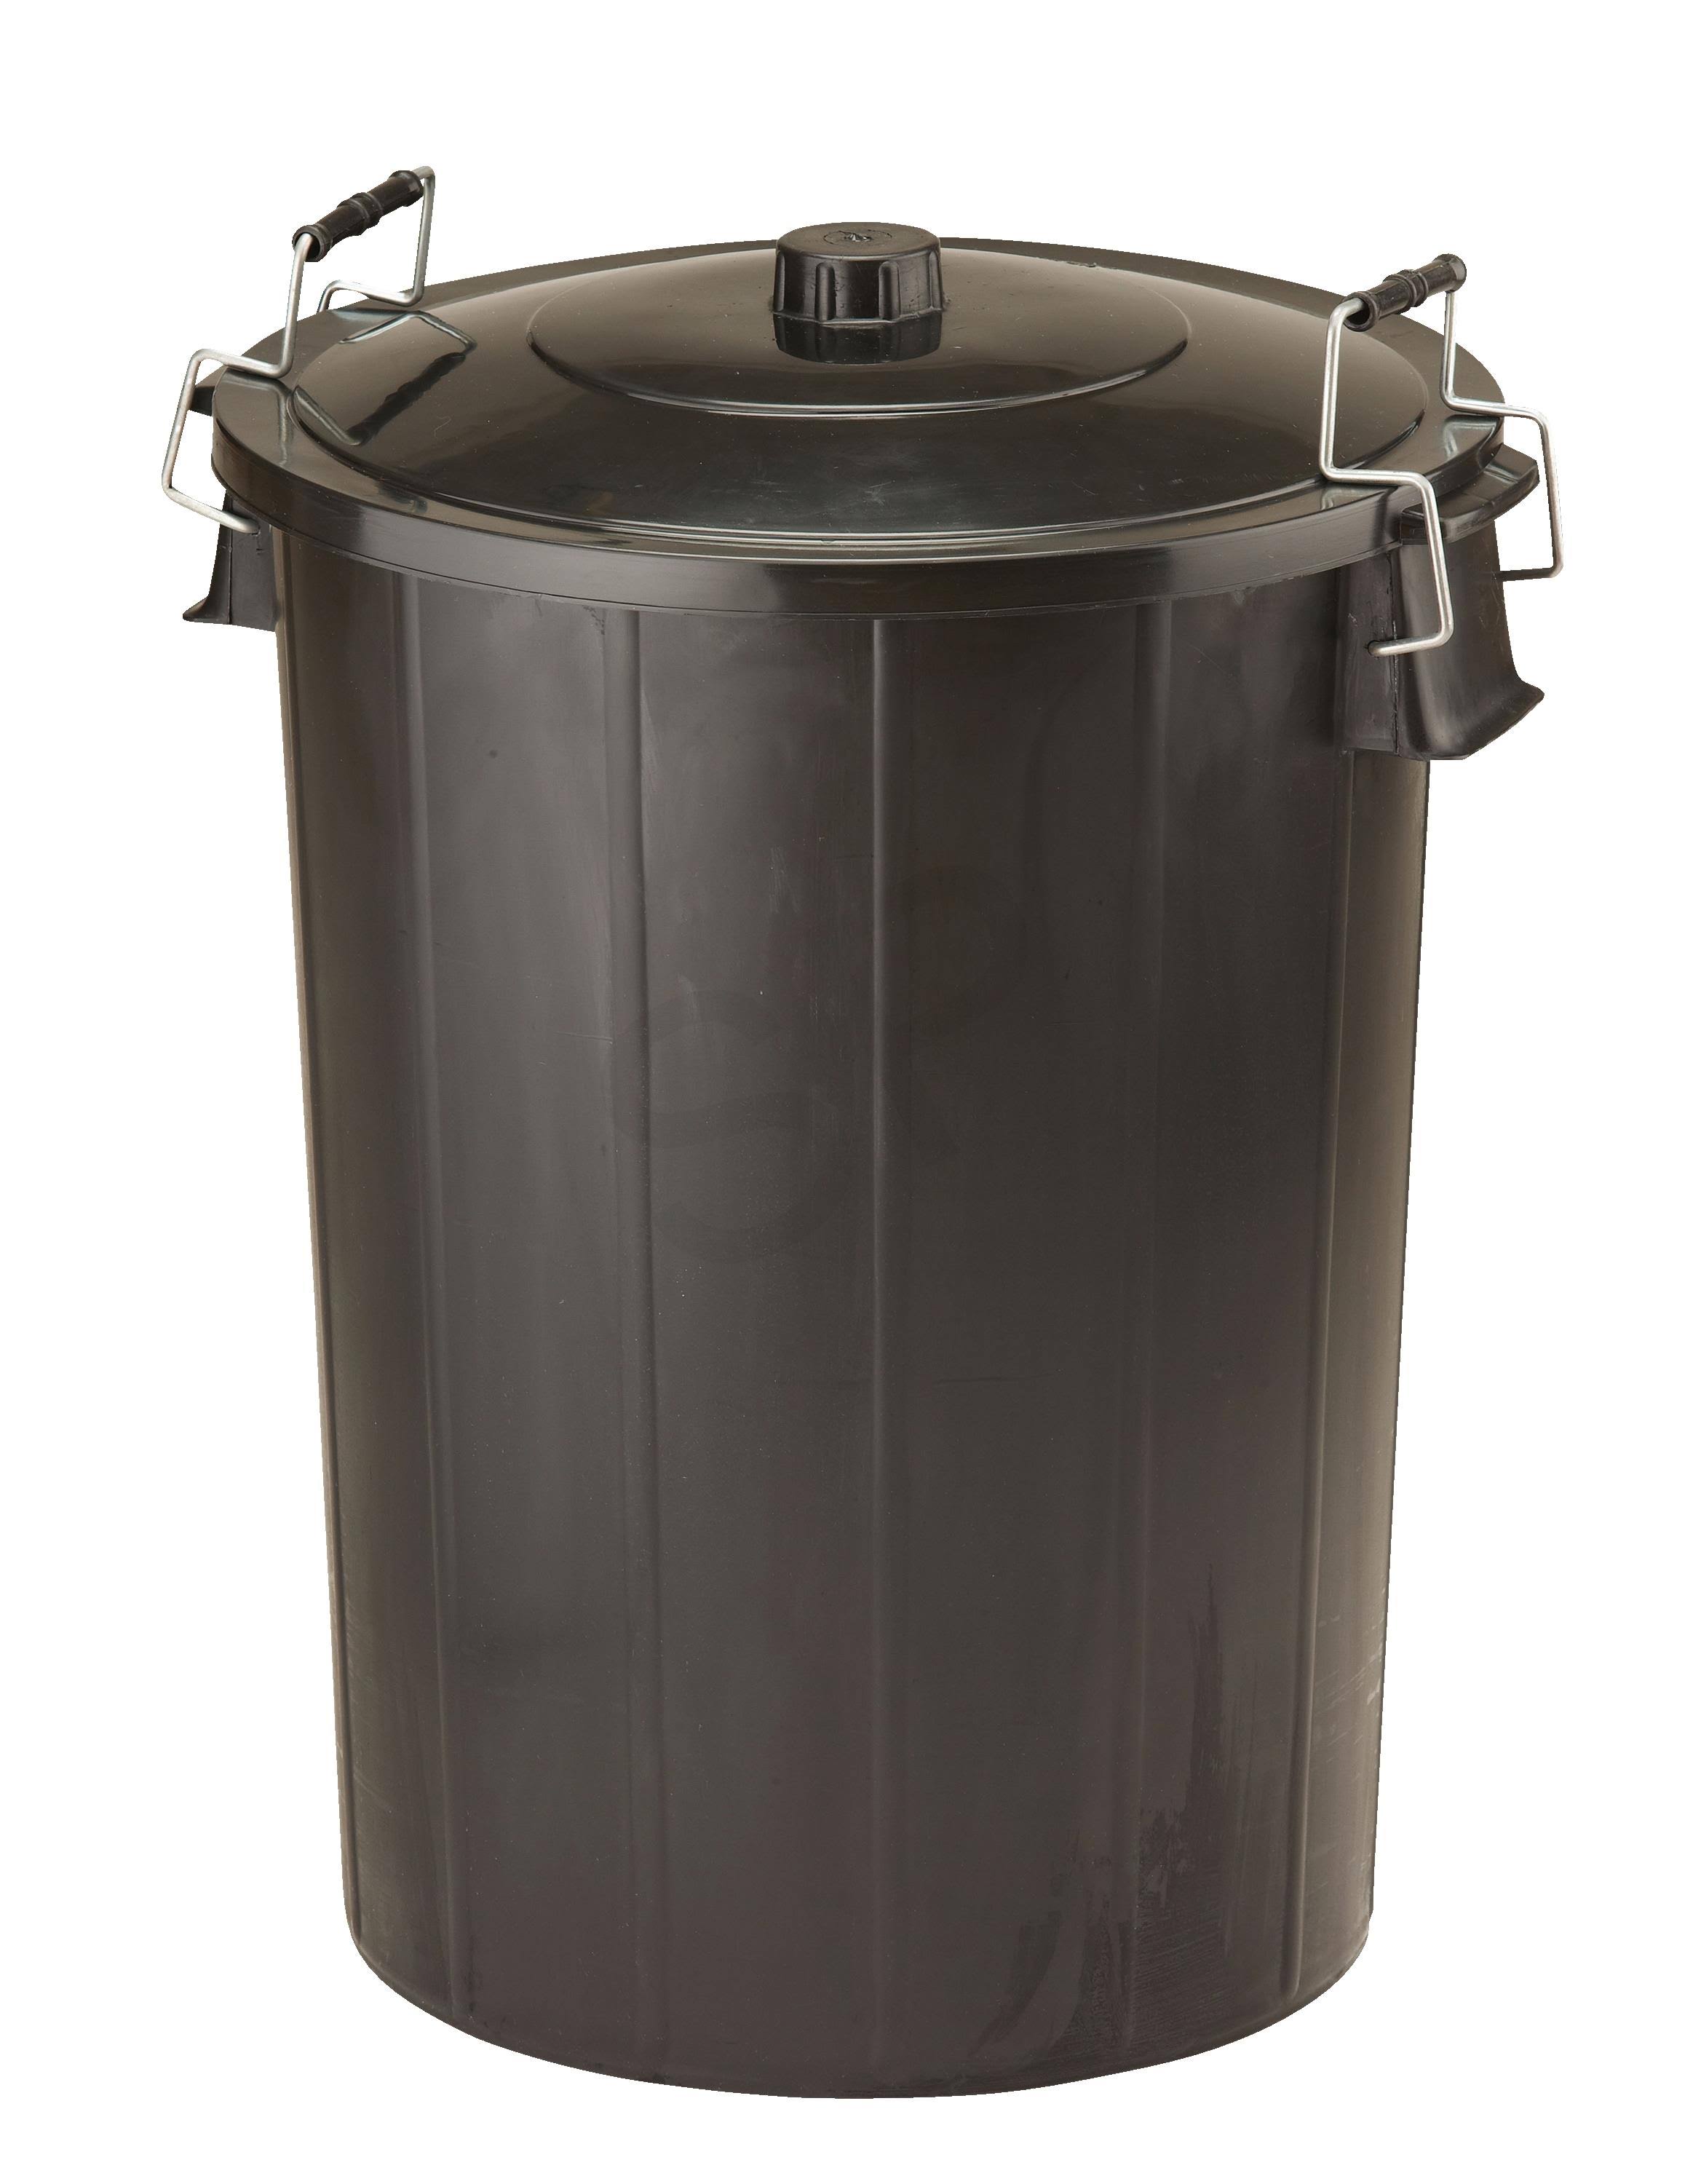 Refuse Bin With Lid and Metal Clip Handles - Black, 80l